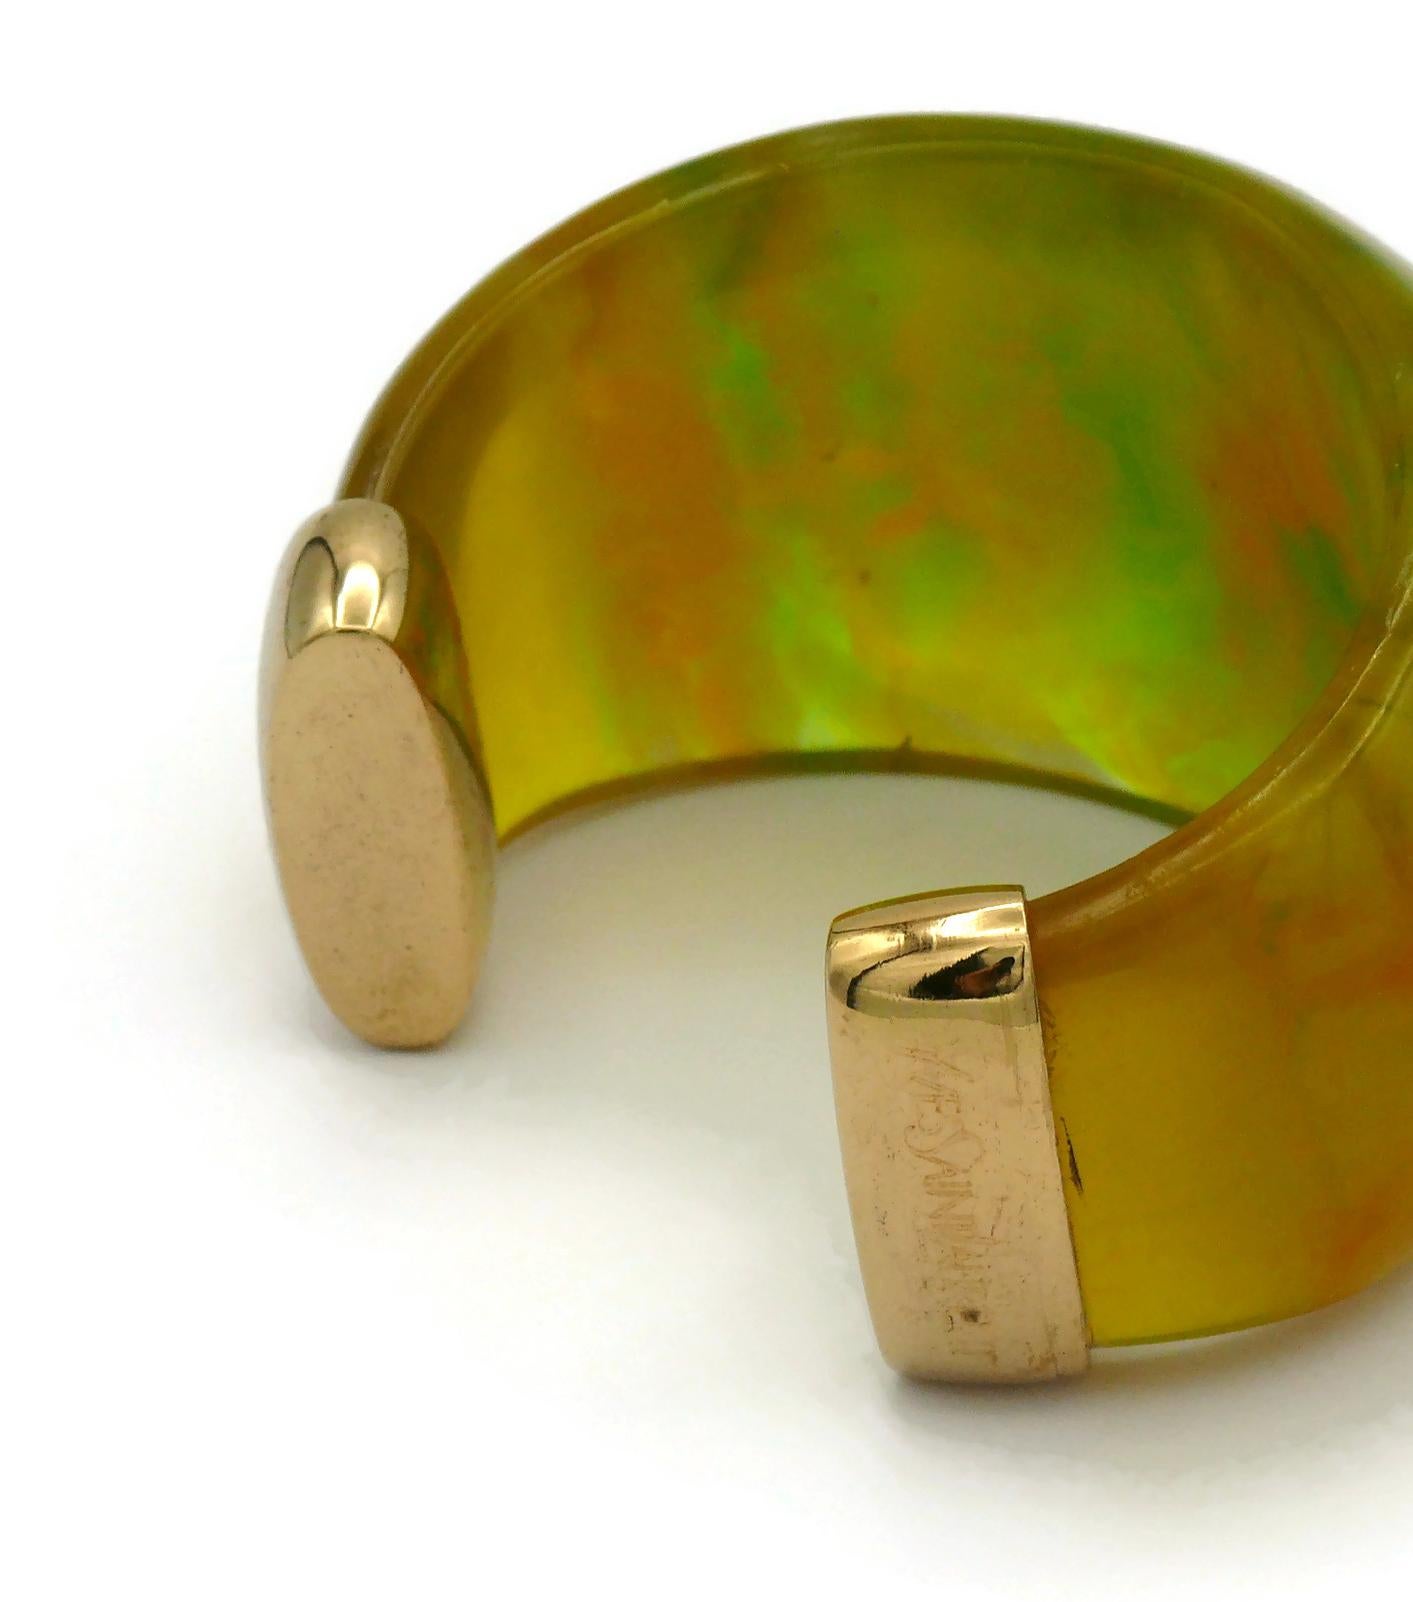 YVES SAINT LAURENT YSL Vintage Yellow Green Marbled Resin Cuff Bracelet For Sale 11